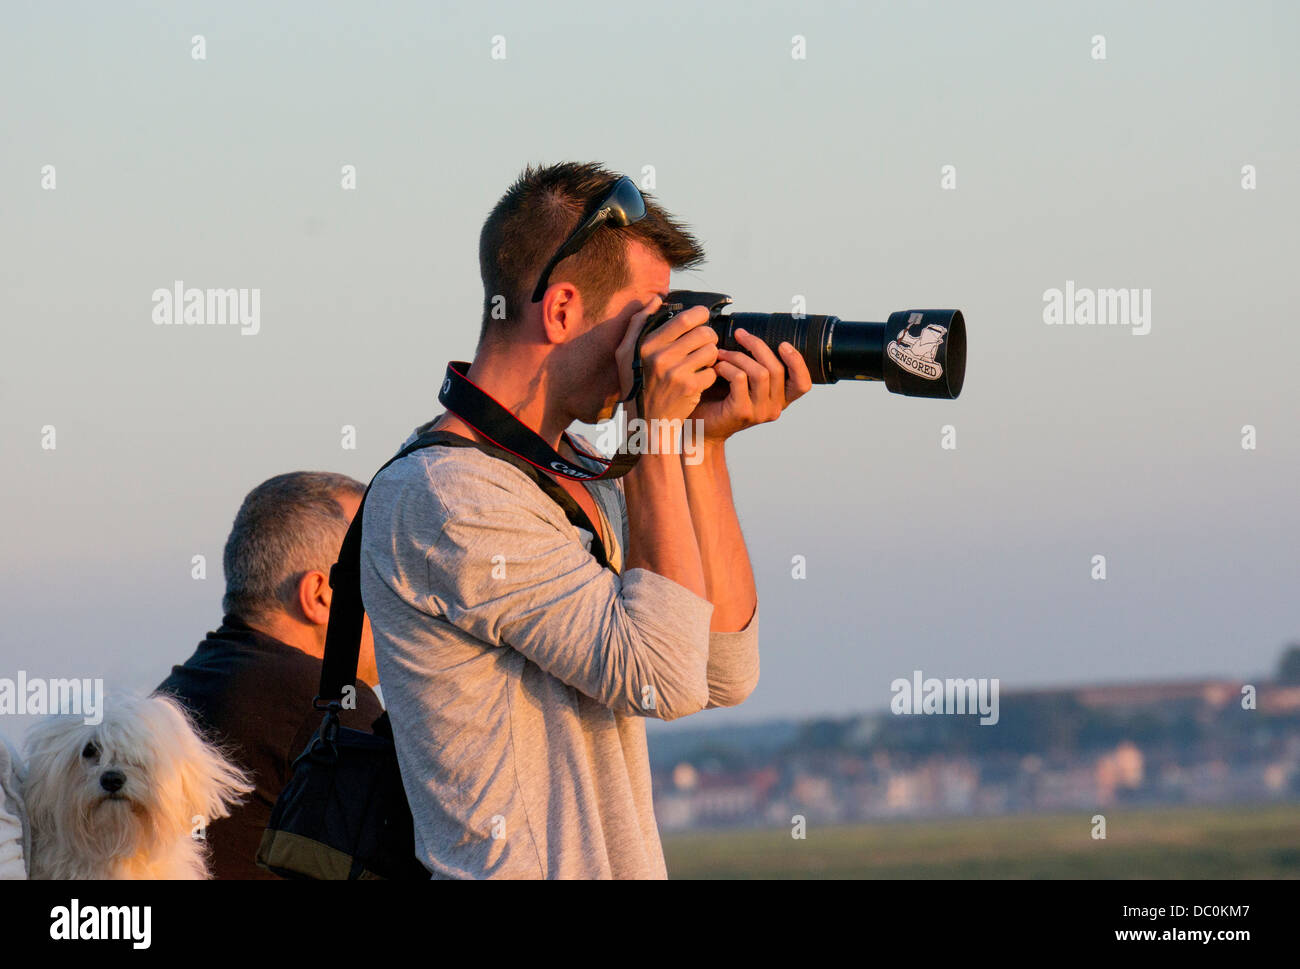 A French photographer taking a picture with a DSLR and extended zoom lens. France, Europe. Stock Photo